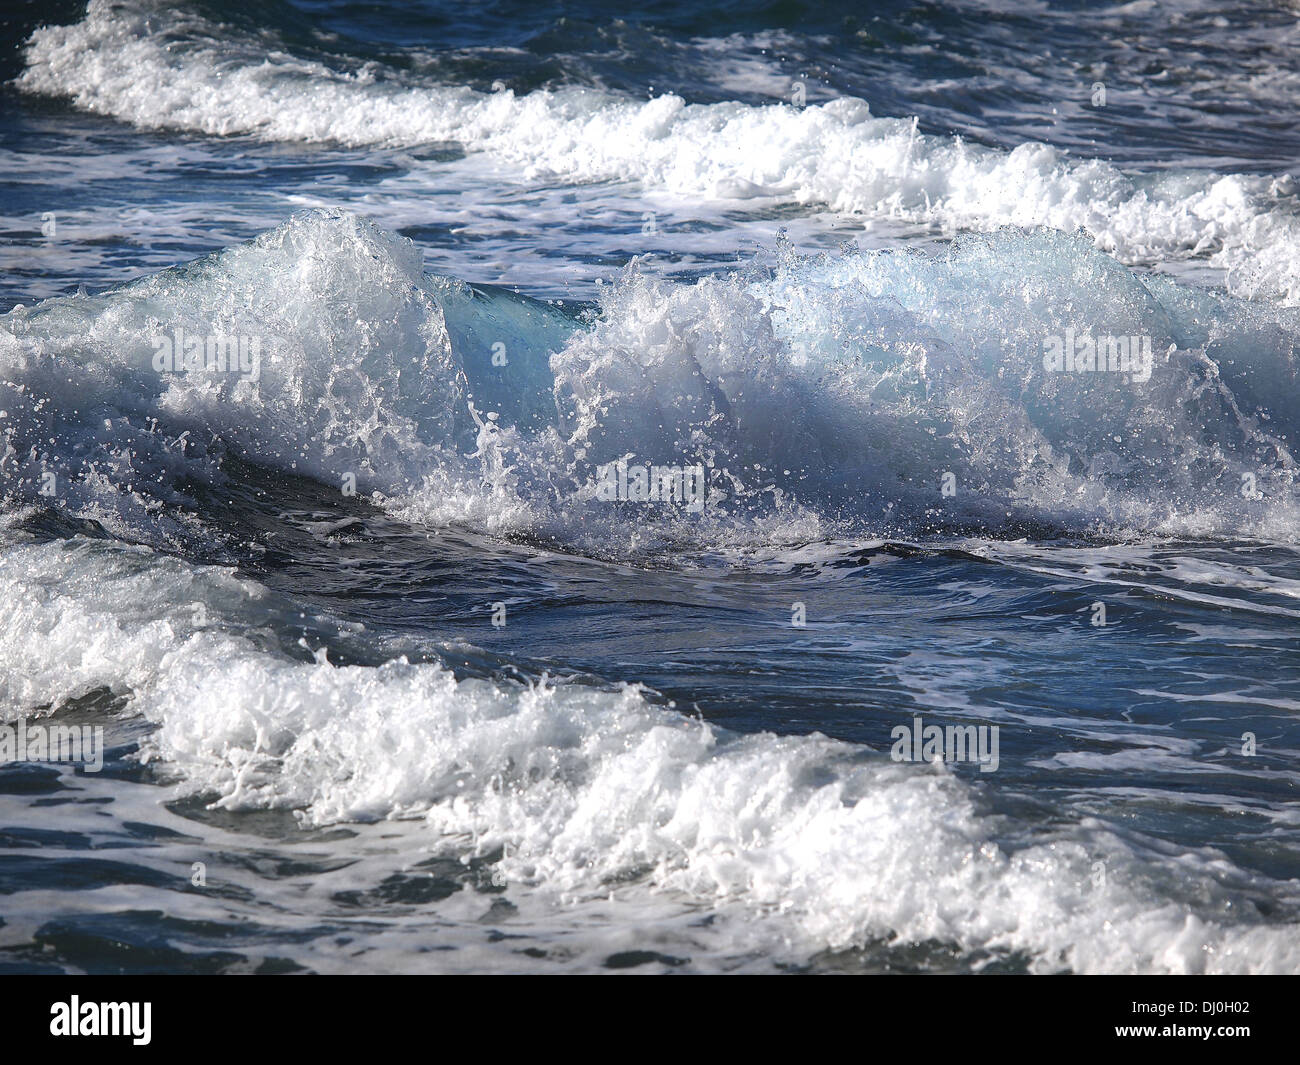 Turquoise rolling wave slamming on the rocks of the coastline  Stock Photo